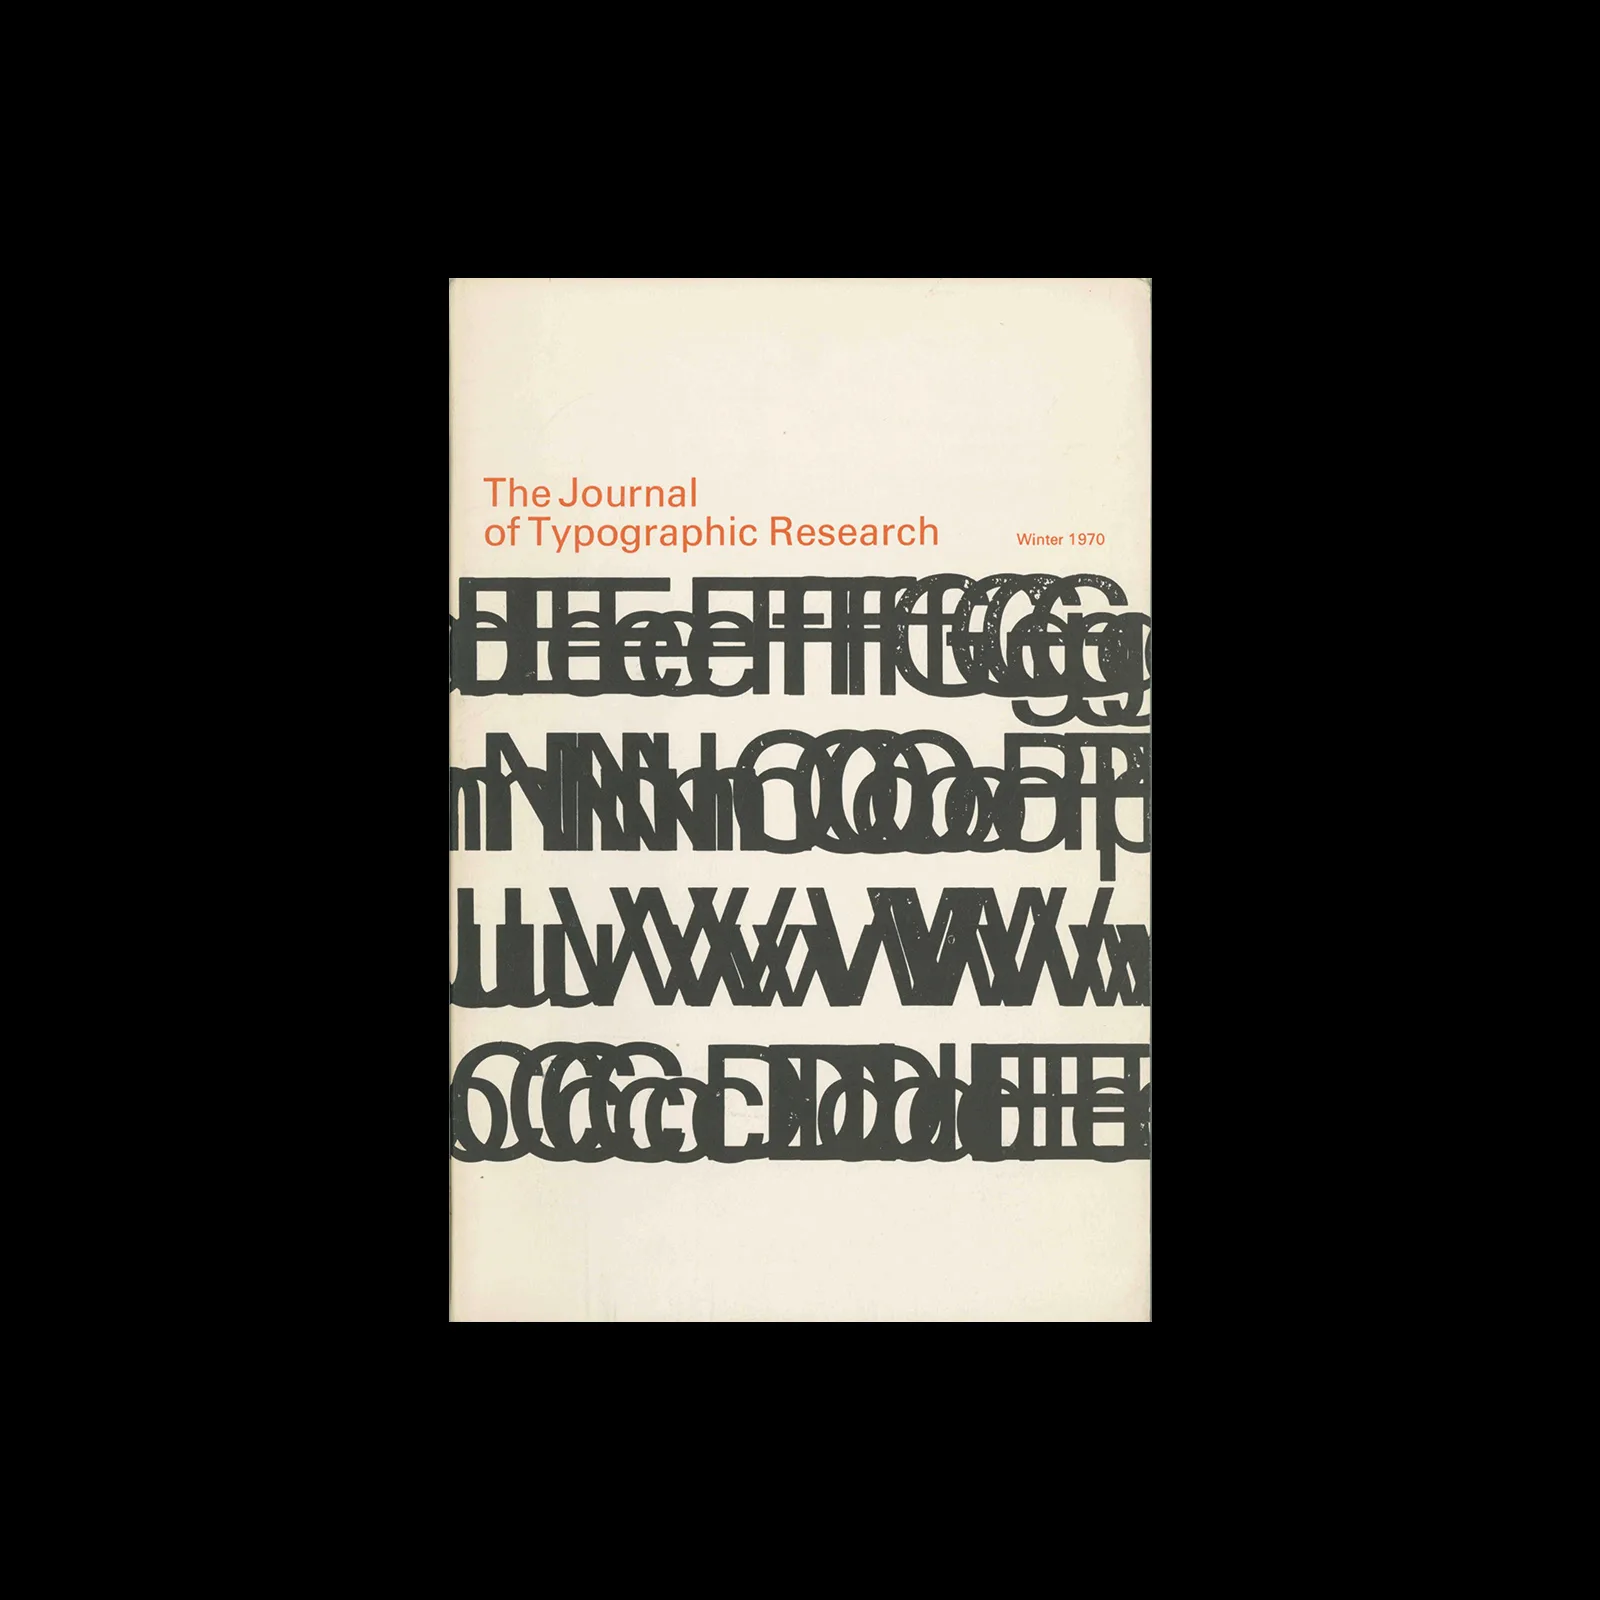 Visible Language The Journal of Typographic Research Vol 04 01 Winter 1970 jpg